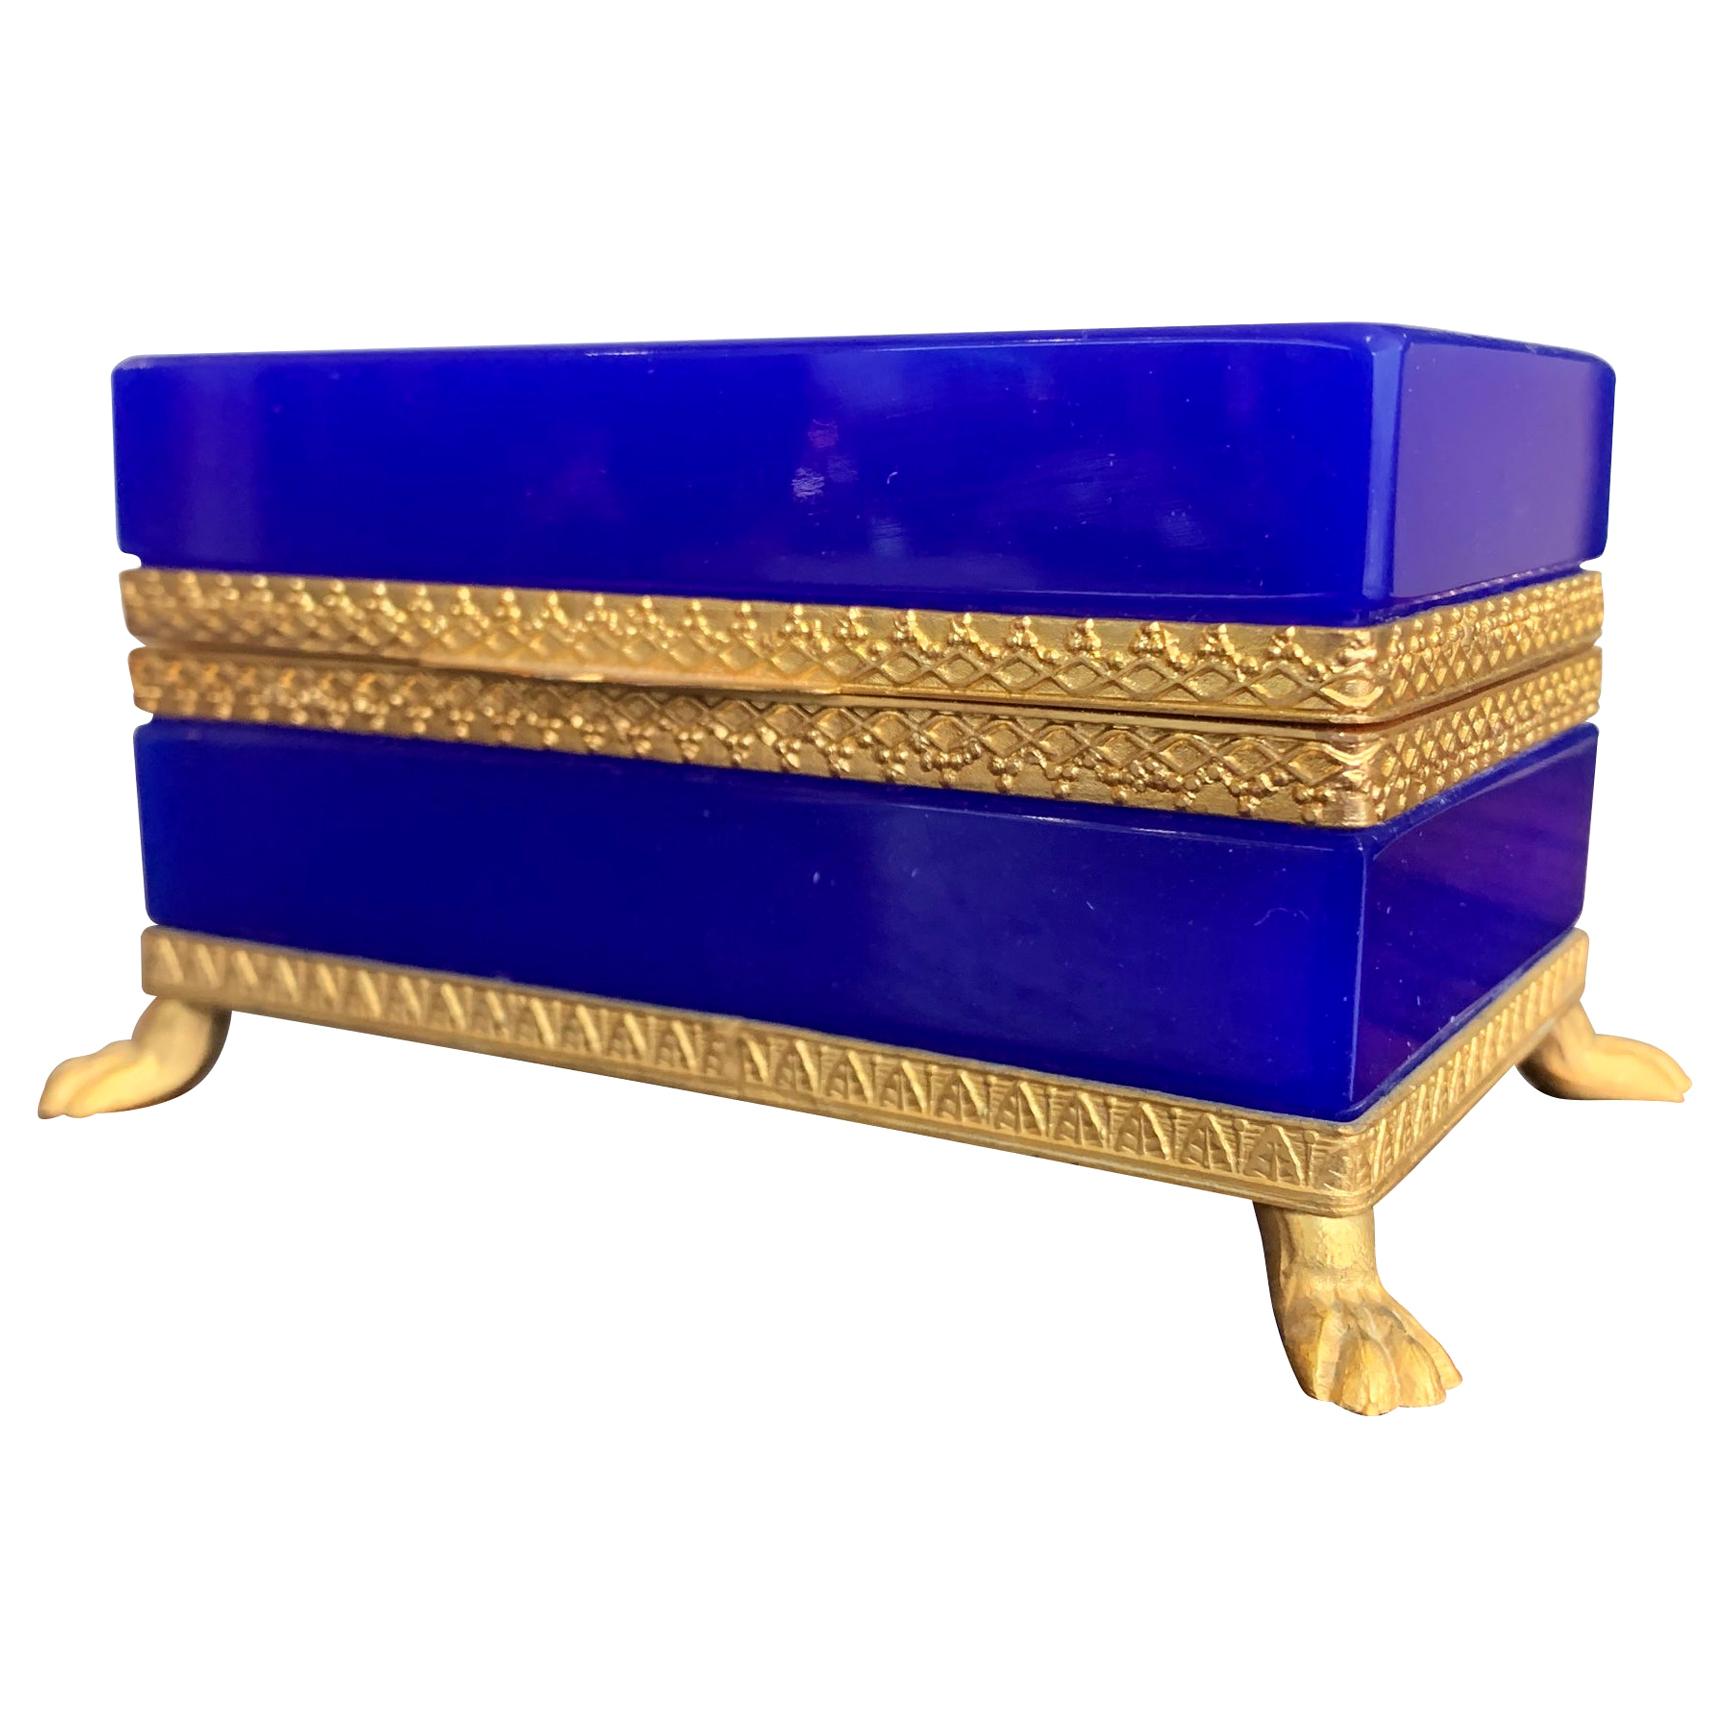 Stunning 1950s Cobalt Blue Murano Glass Hinged Jewellery Box by Cendese, Italy